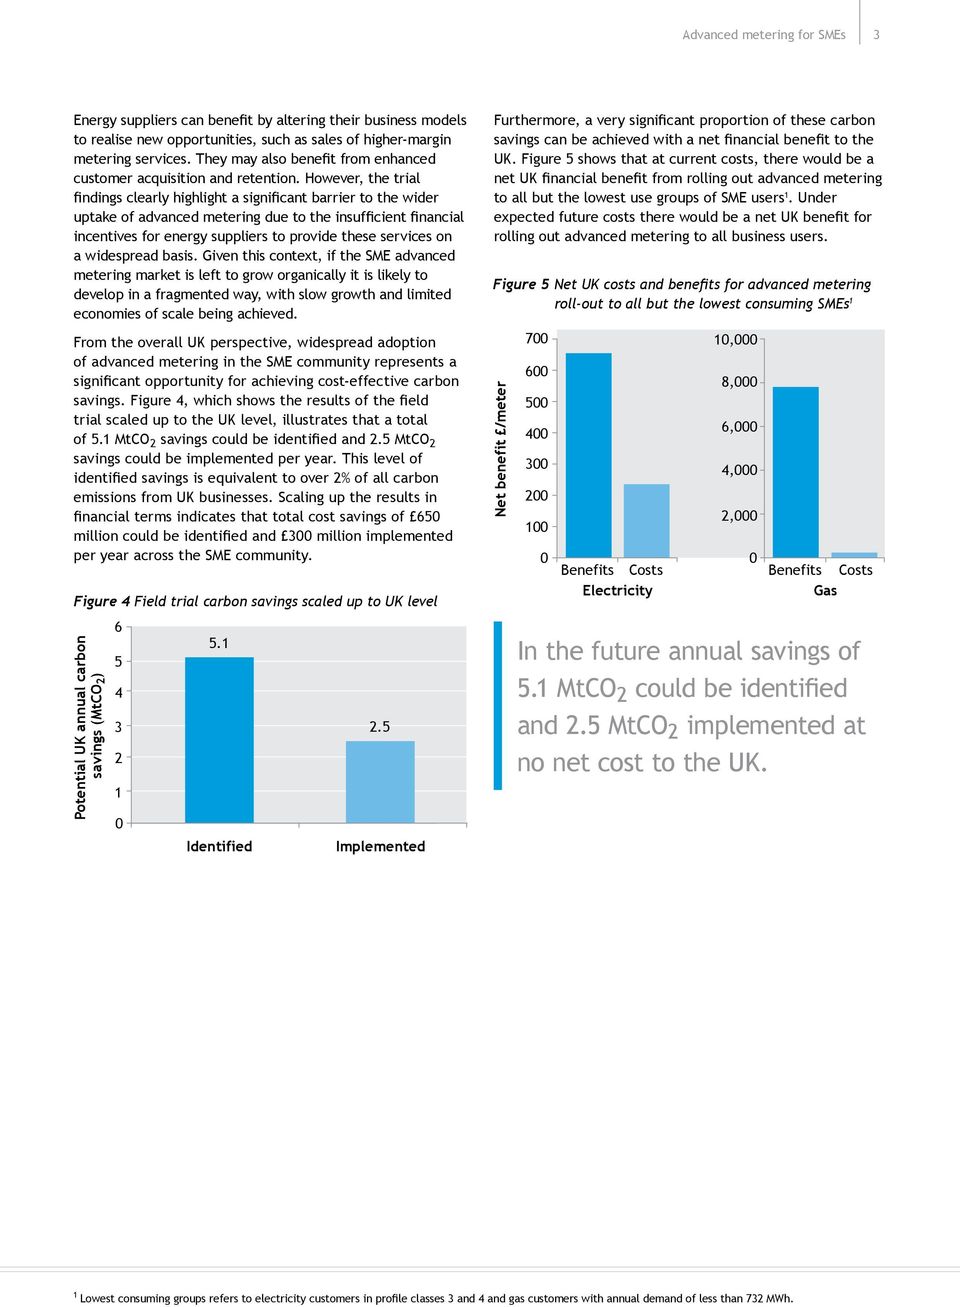 However, the trial findings clearly highlight a significant barrier to the wider uptake of advanced metering due to the insufficient financial incentives for energy suppliers to provide these